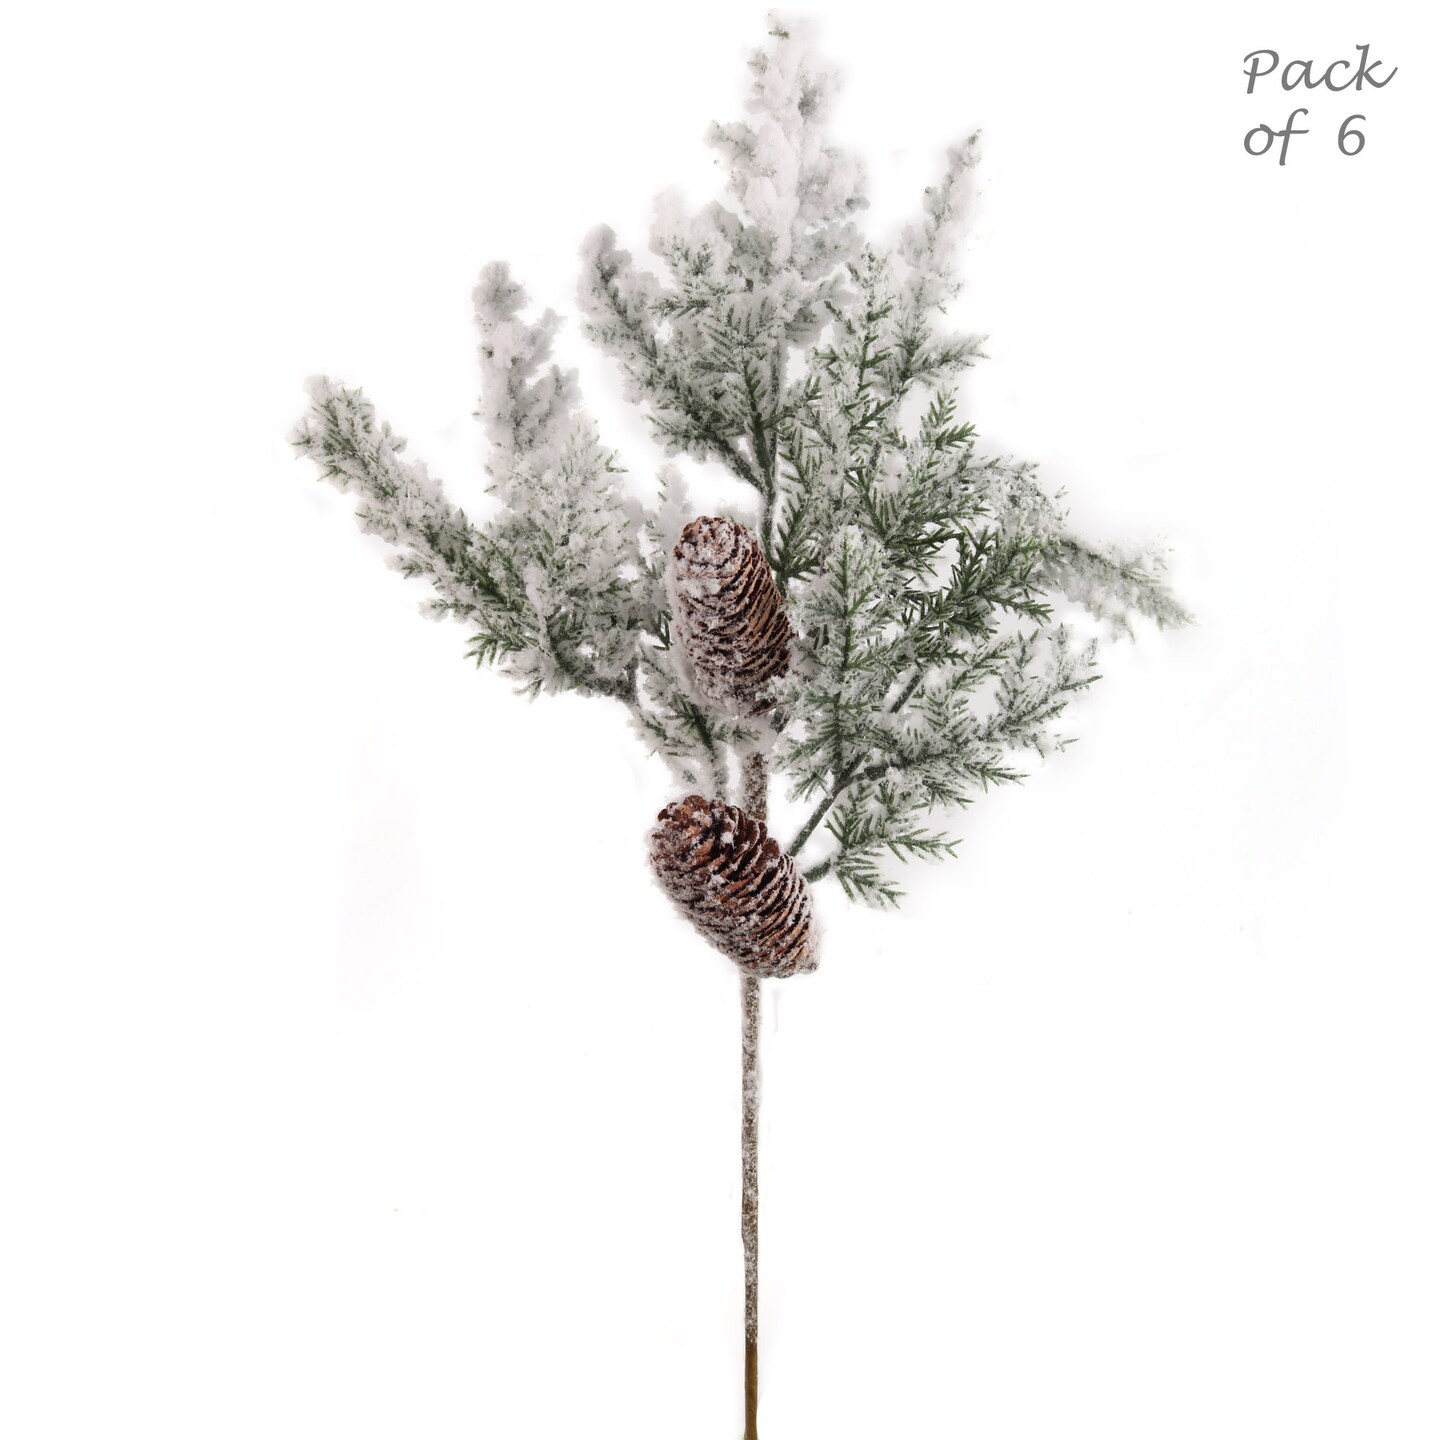 Set of 6: Snow Covered Pine Picks with Lifelike Brown Pine Cones, 20-Inch, Festive Holiday Decor, Christmas Picks, Home & Office Decor